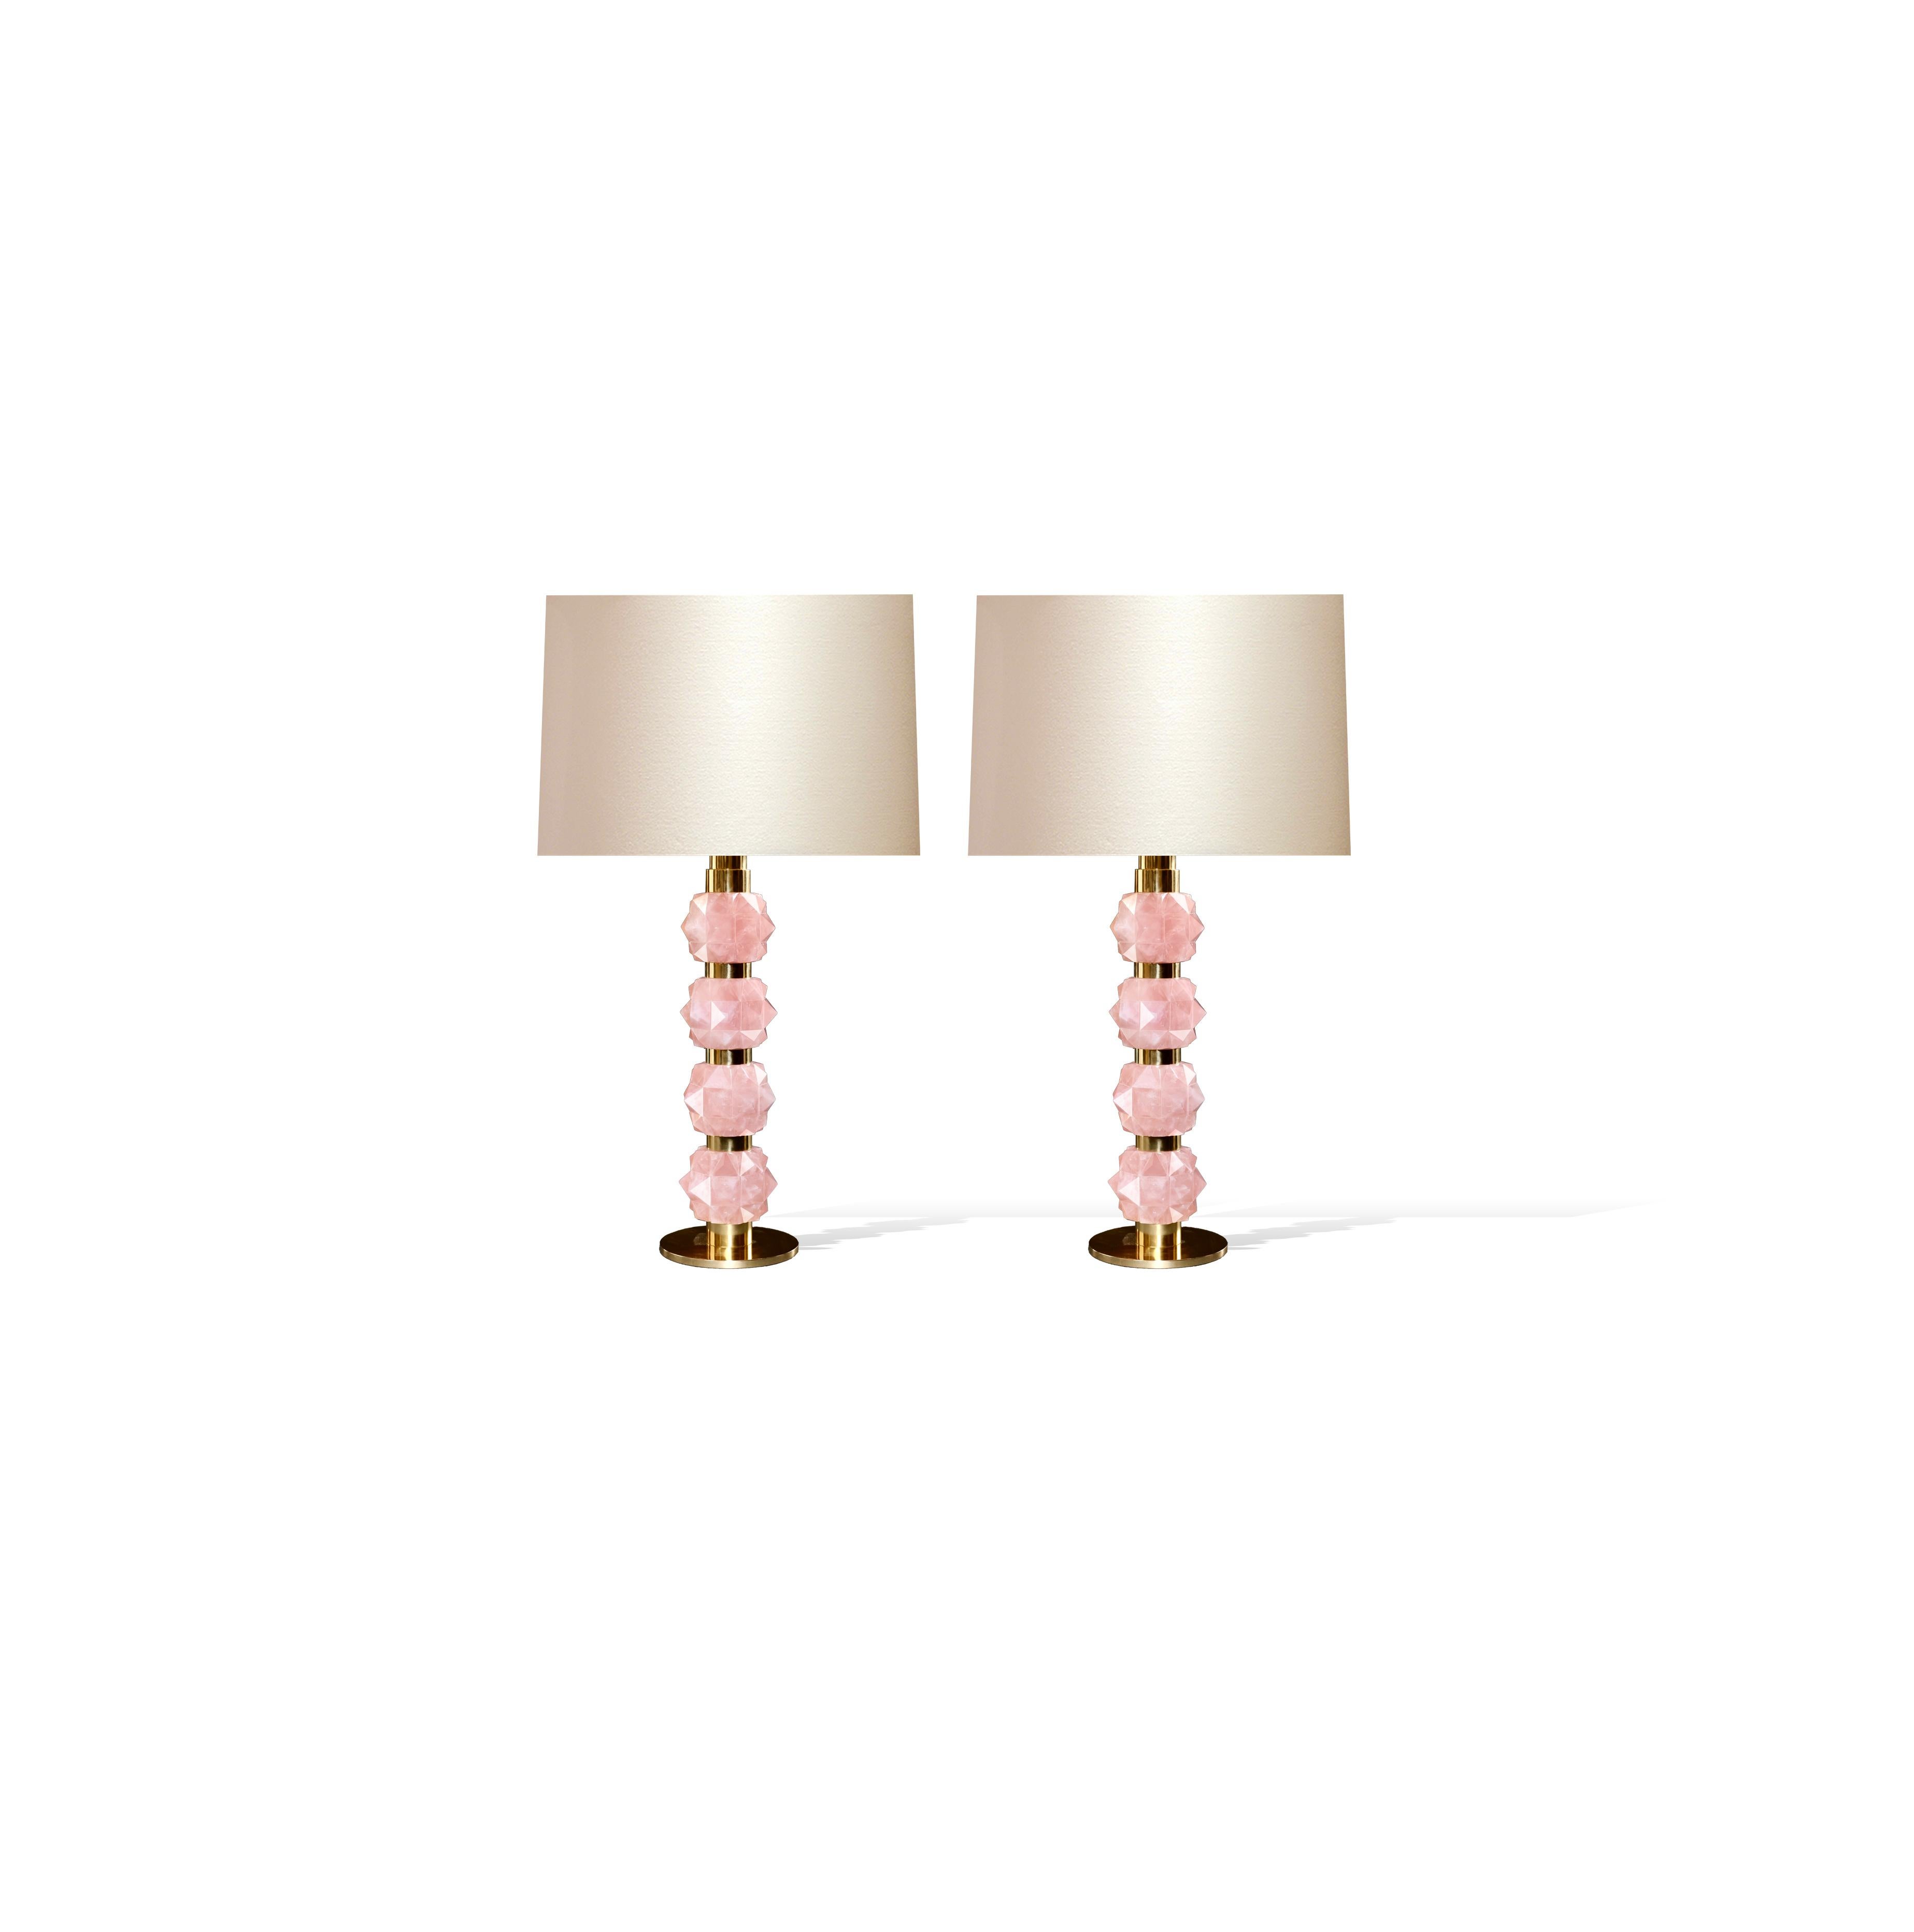 Pair of multi faceted pink rock crystal quartz lamps with polished brass decorations, created by Phoenix gallery.
Lampshades not included.
To the top of the rock crystal 18.5 inch.